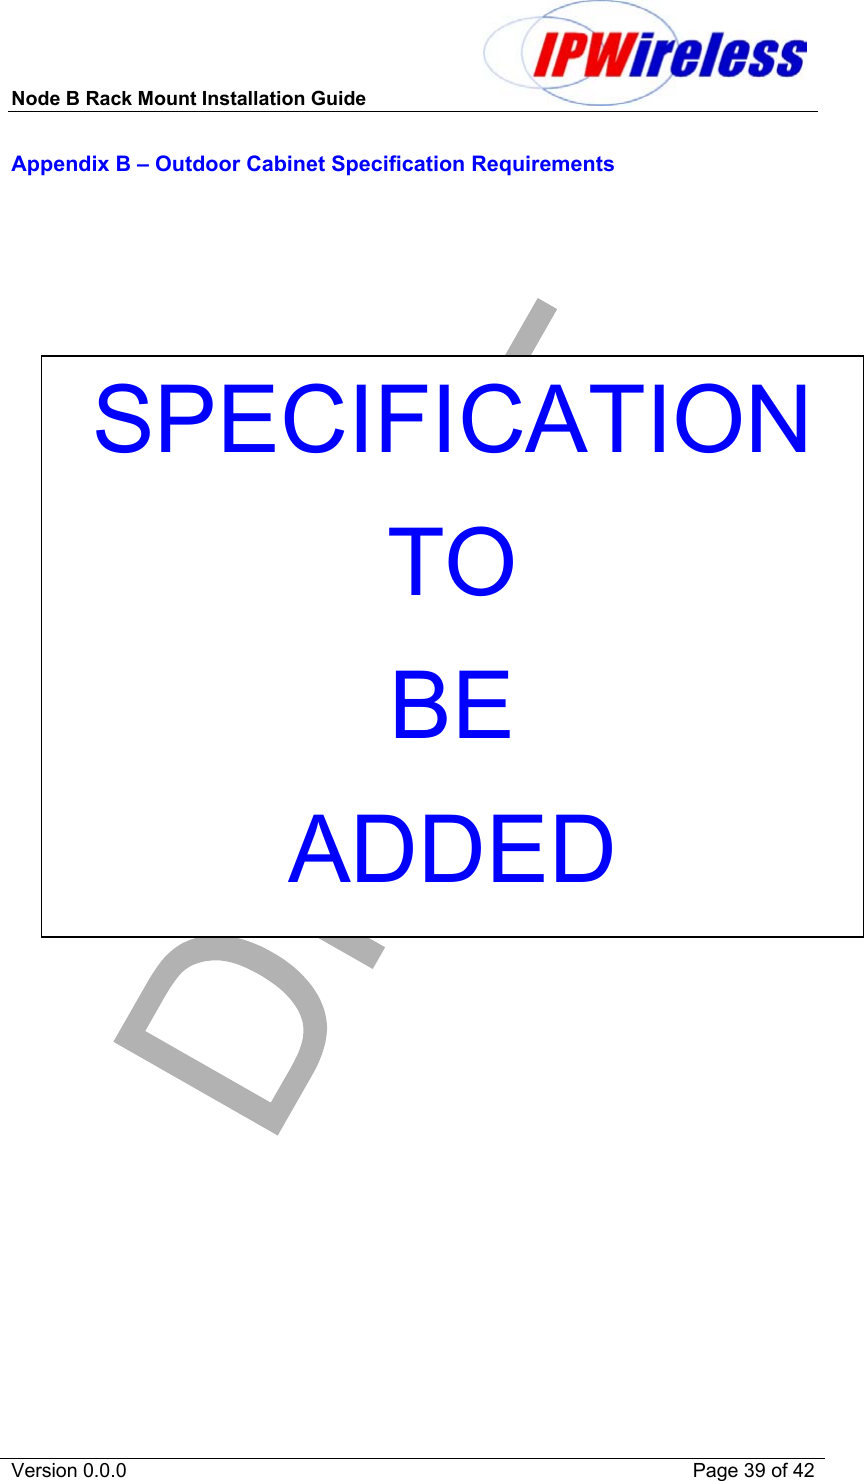 Node B Rack Mount Installation Guide                           Version 0.0.0    Page 39 of 42 Appendix B – Outdoor Cabinet Specification Requirements SPECIFICATIONTO  BE ADDED 